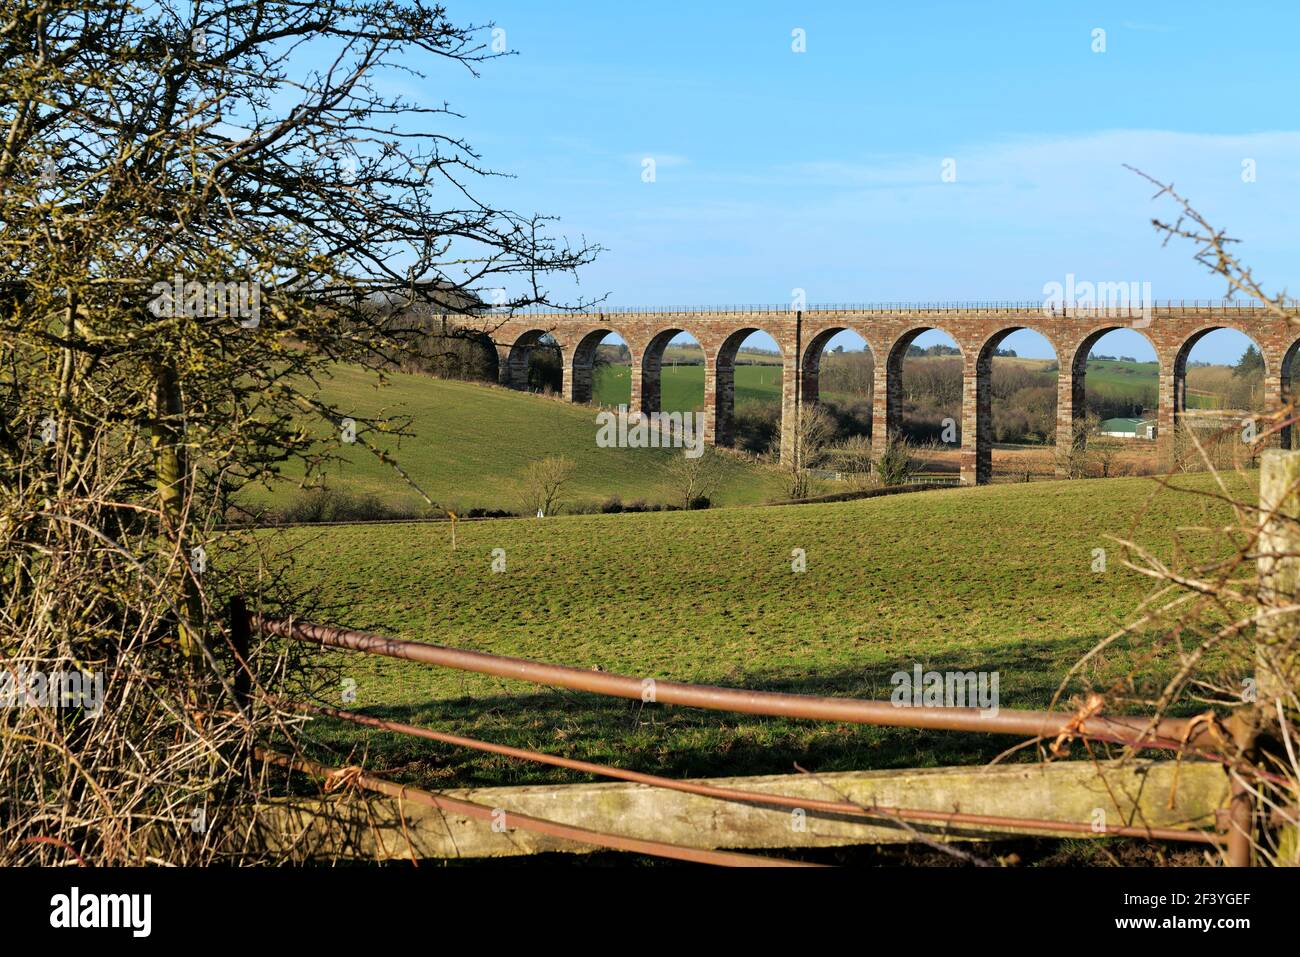 View looking towards the Ayr to Dalmelington railway viaduct near the village of Dalrymple on a March afternoon. Stock Photo